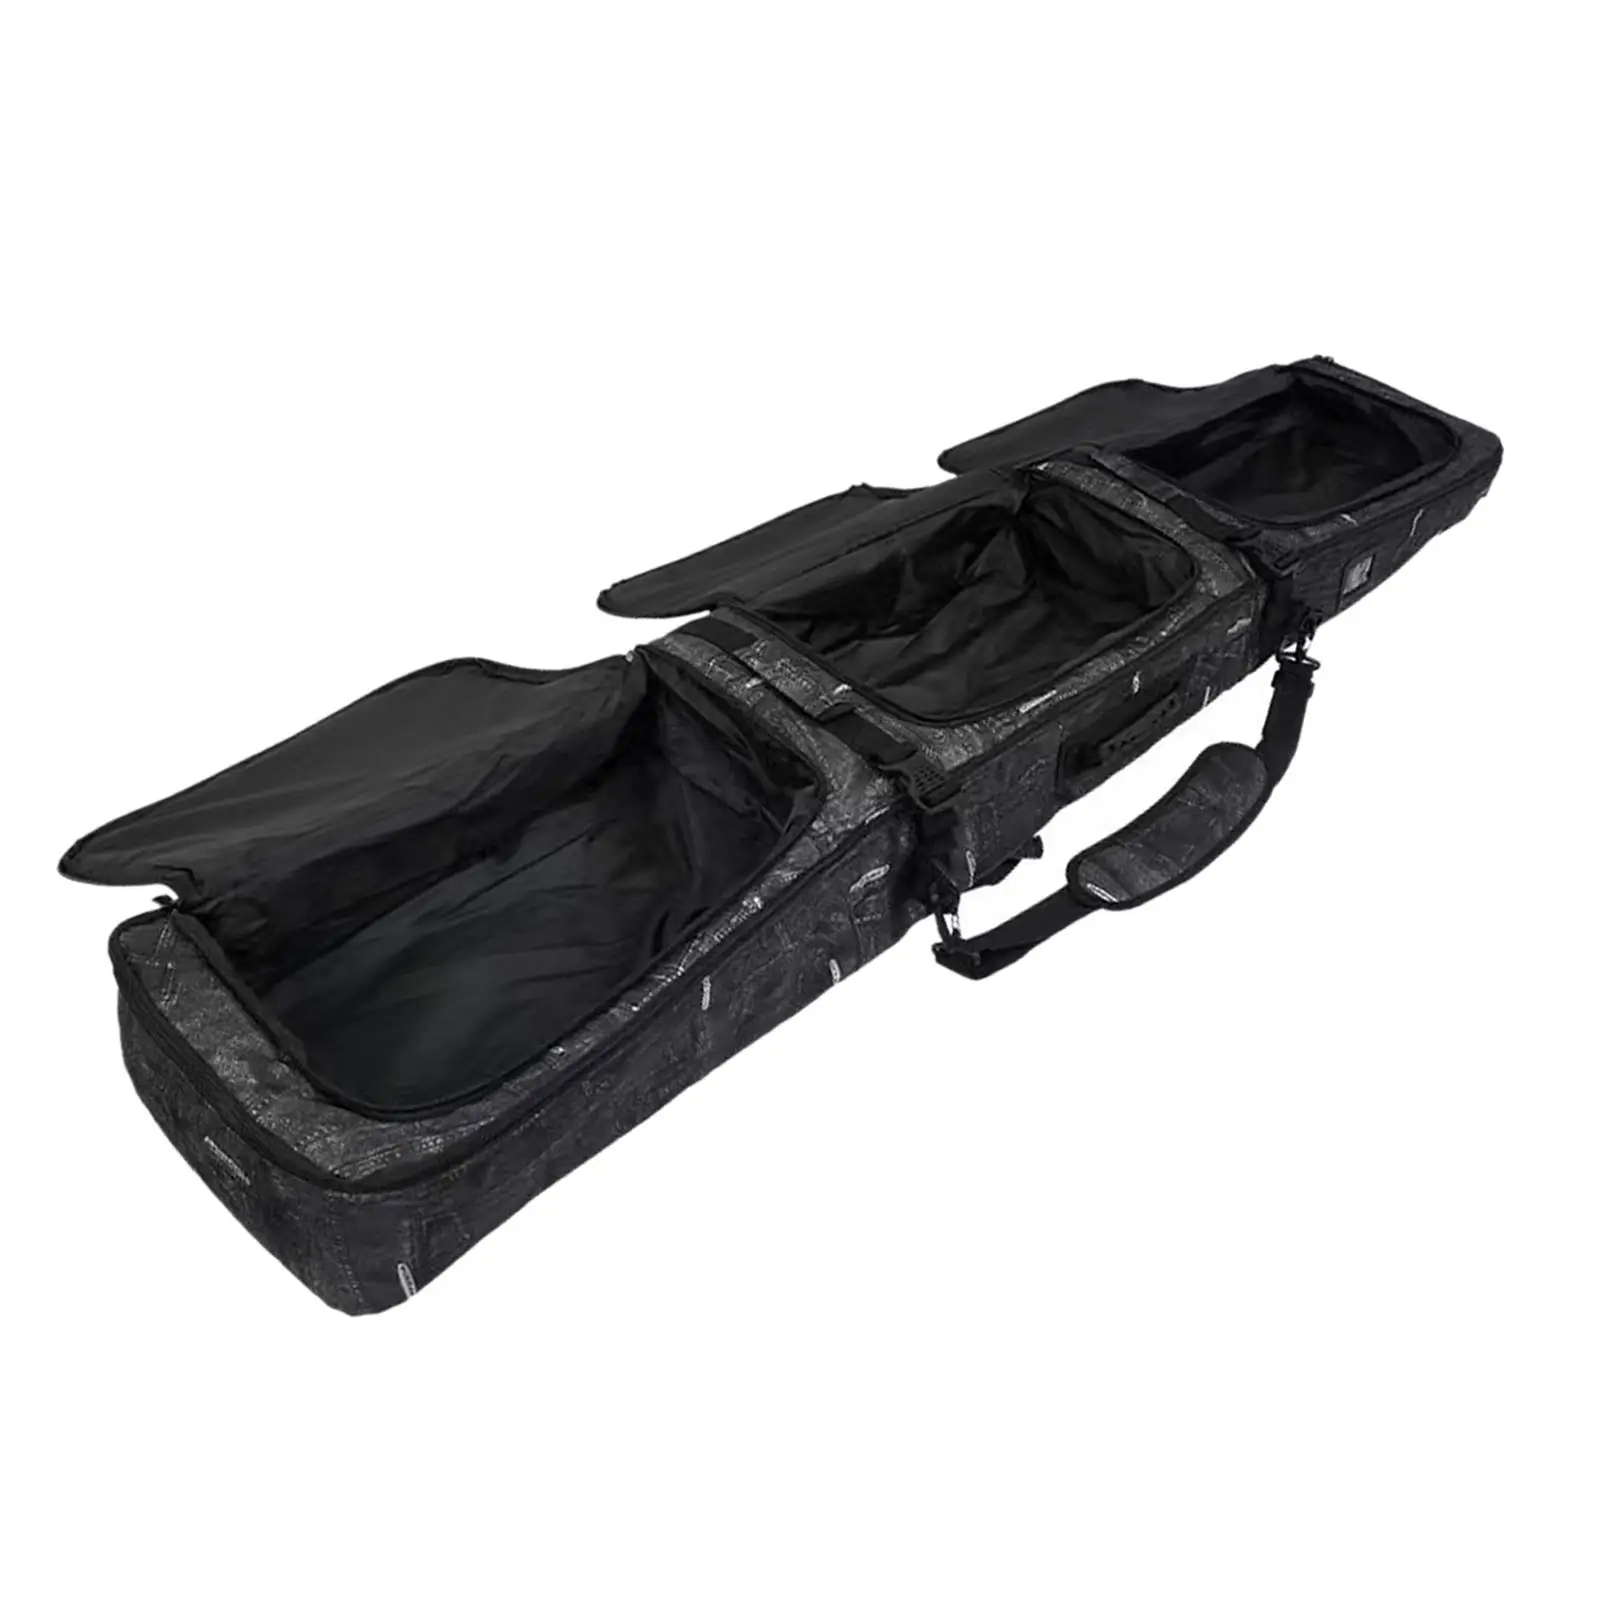 Snowboard Bag with Wheels Snowboard Travel Bag Protection for Air Travel for Trip Skiing Boards Women Men Playing Outdoor